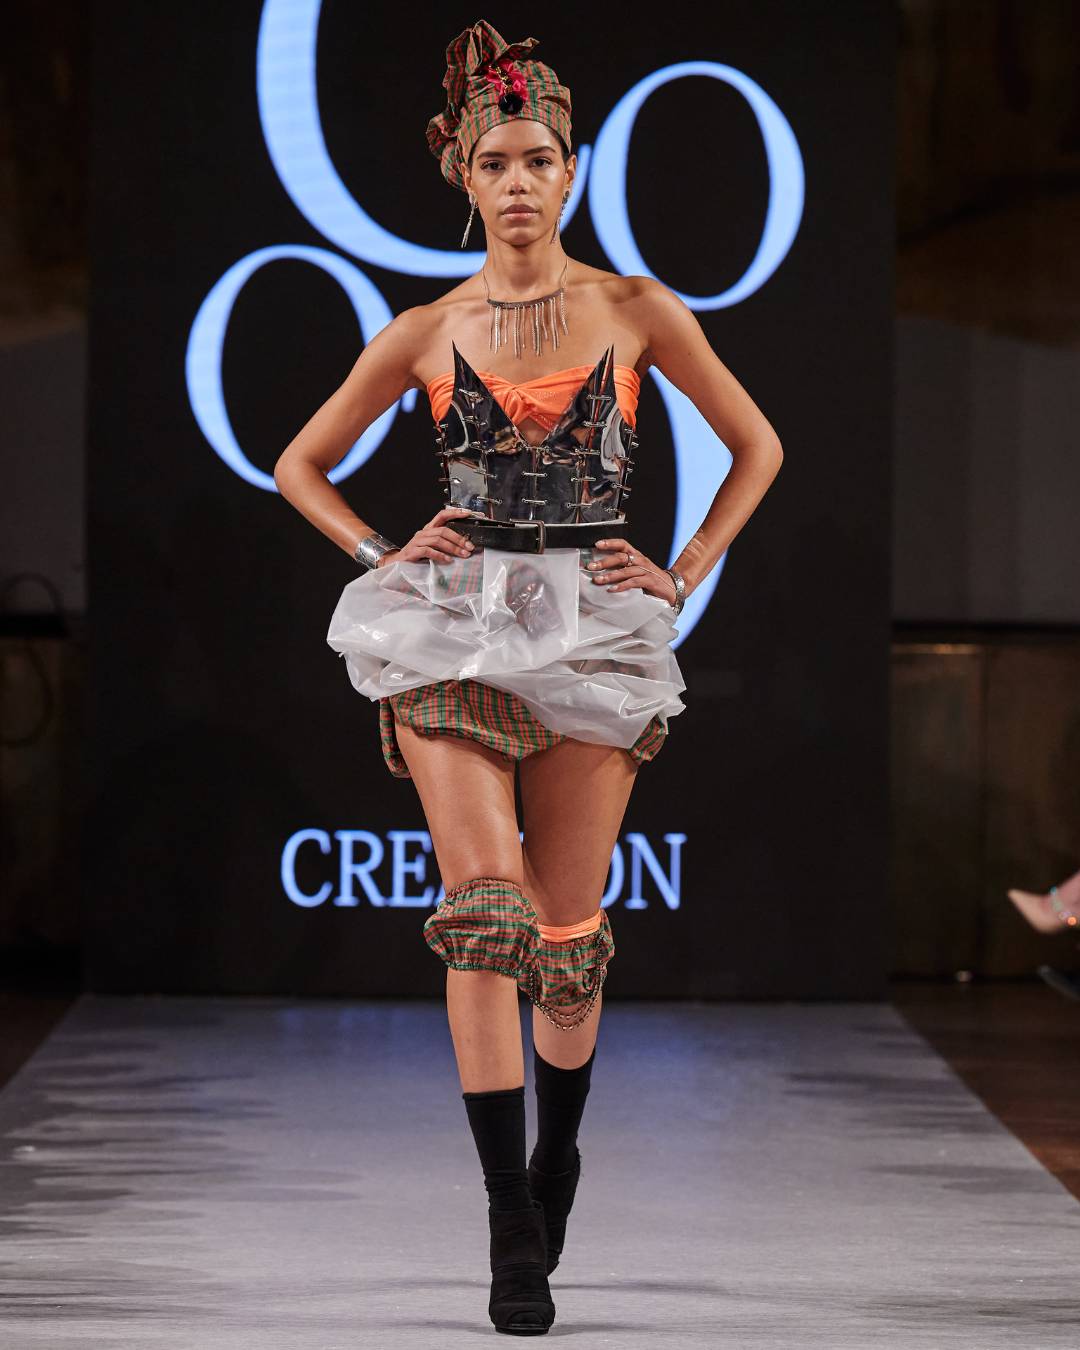 A model with a leather corset, plastic skirt and crazy hair walking down the runway.